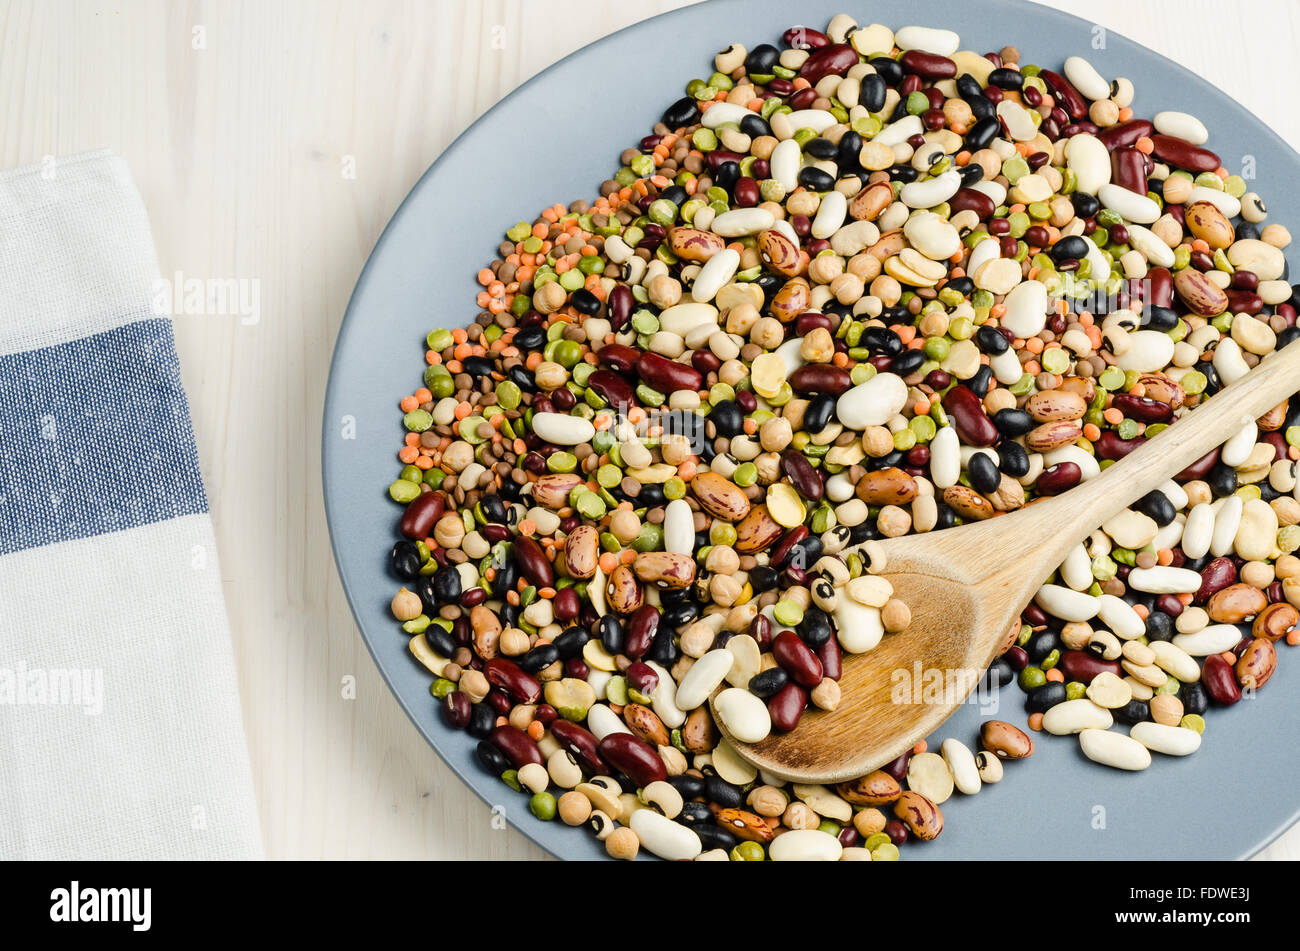 legumes in a dish, close up, background Stock Photo